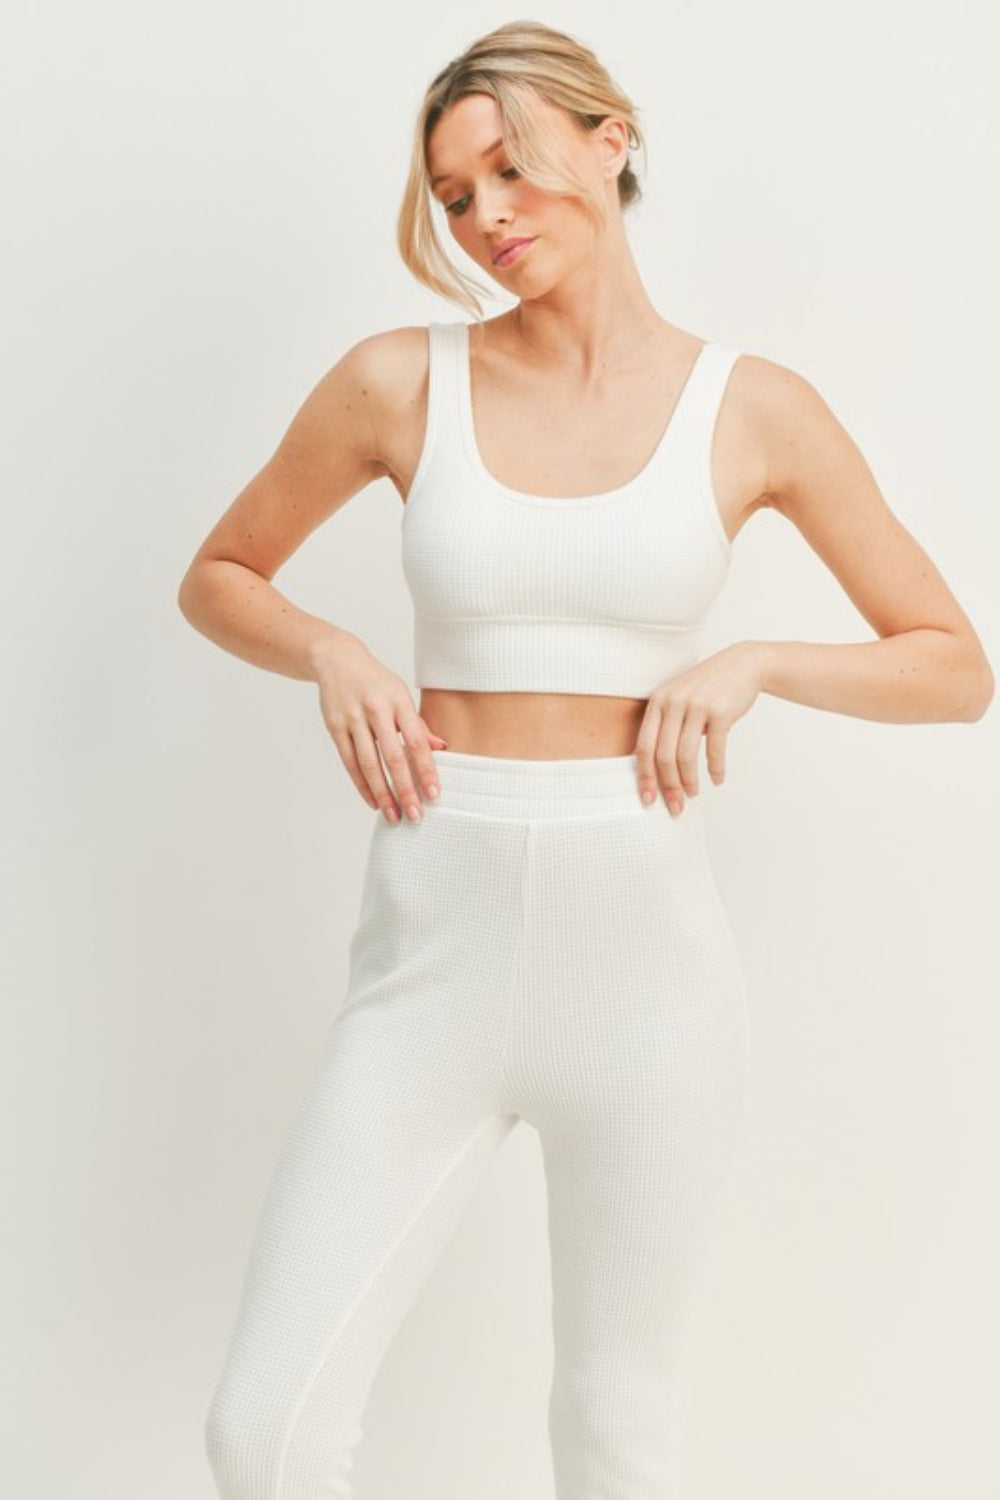 Classy White Color Tank and Pants Set